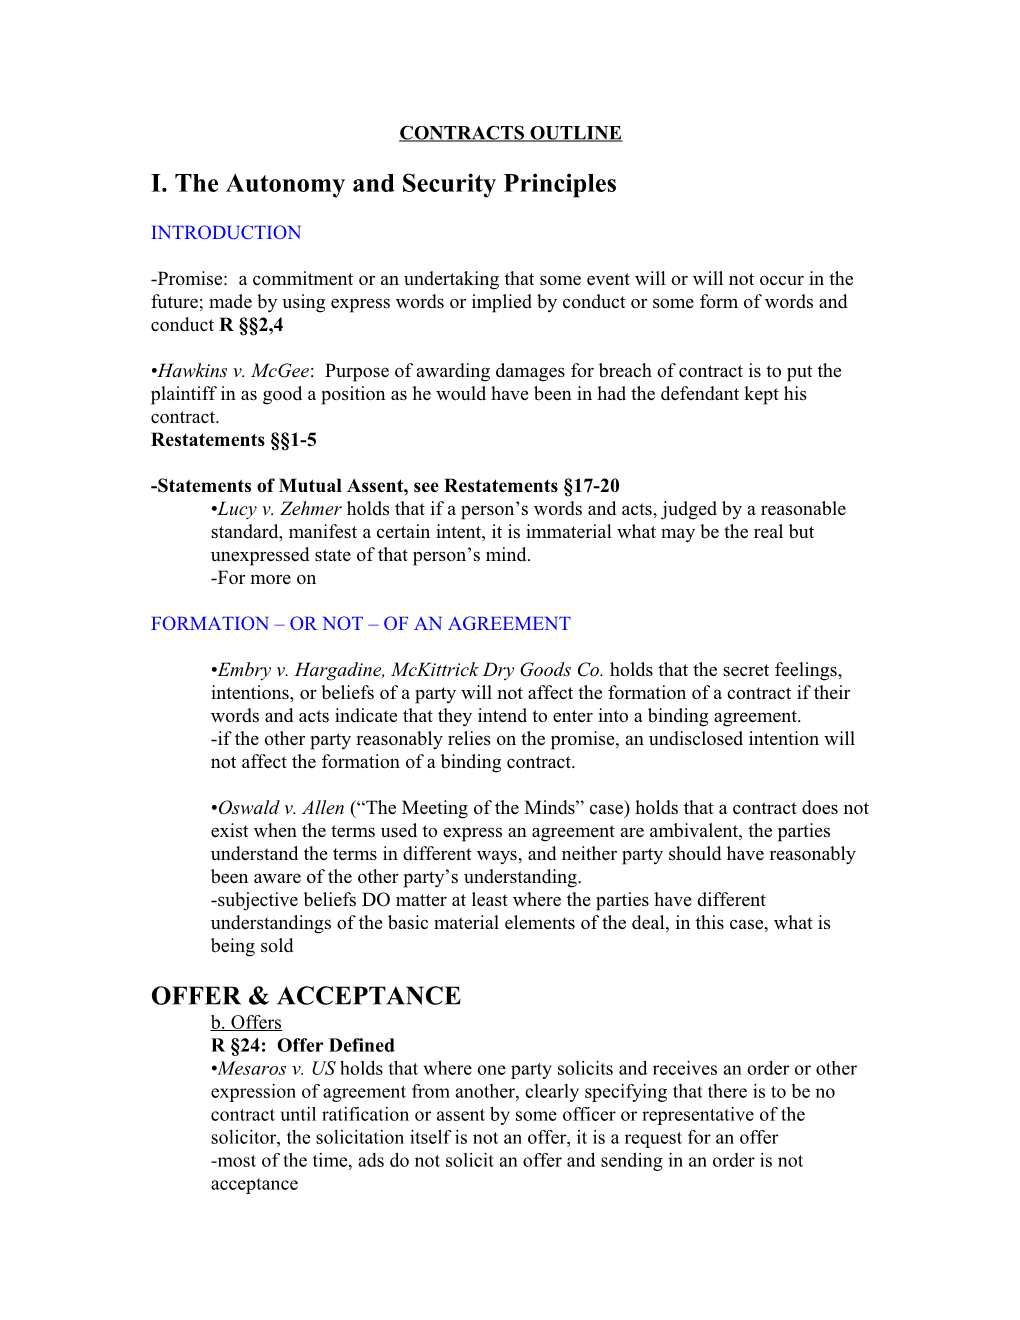 I. the Autonomy and Security Principles